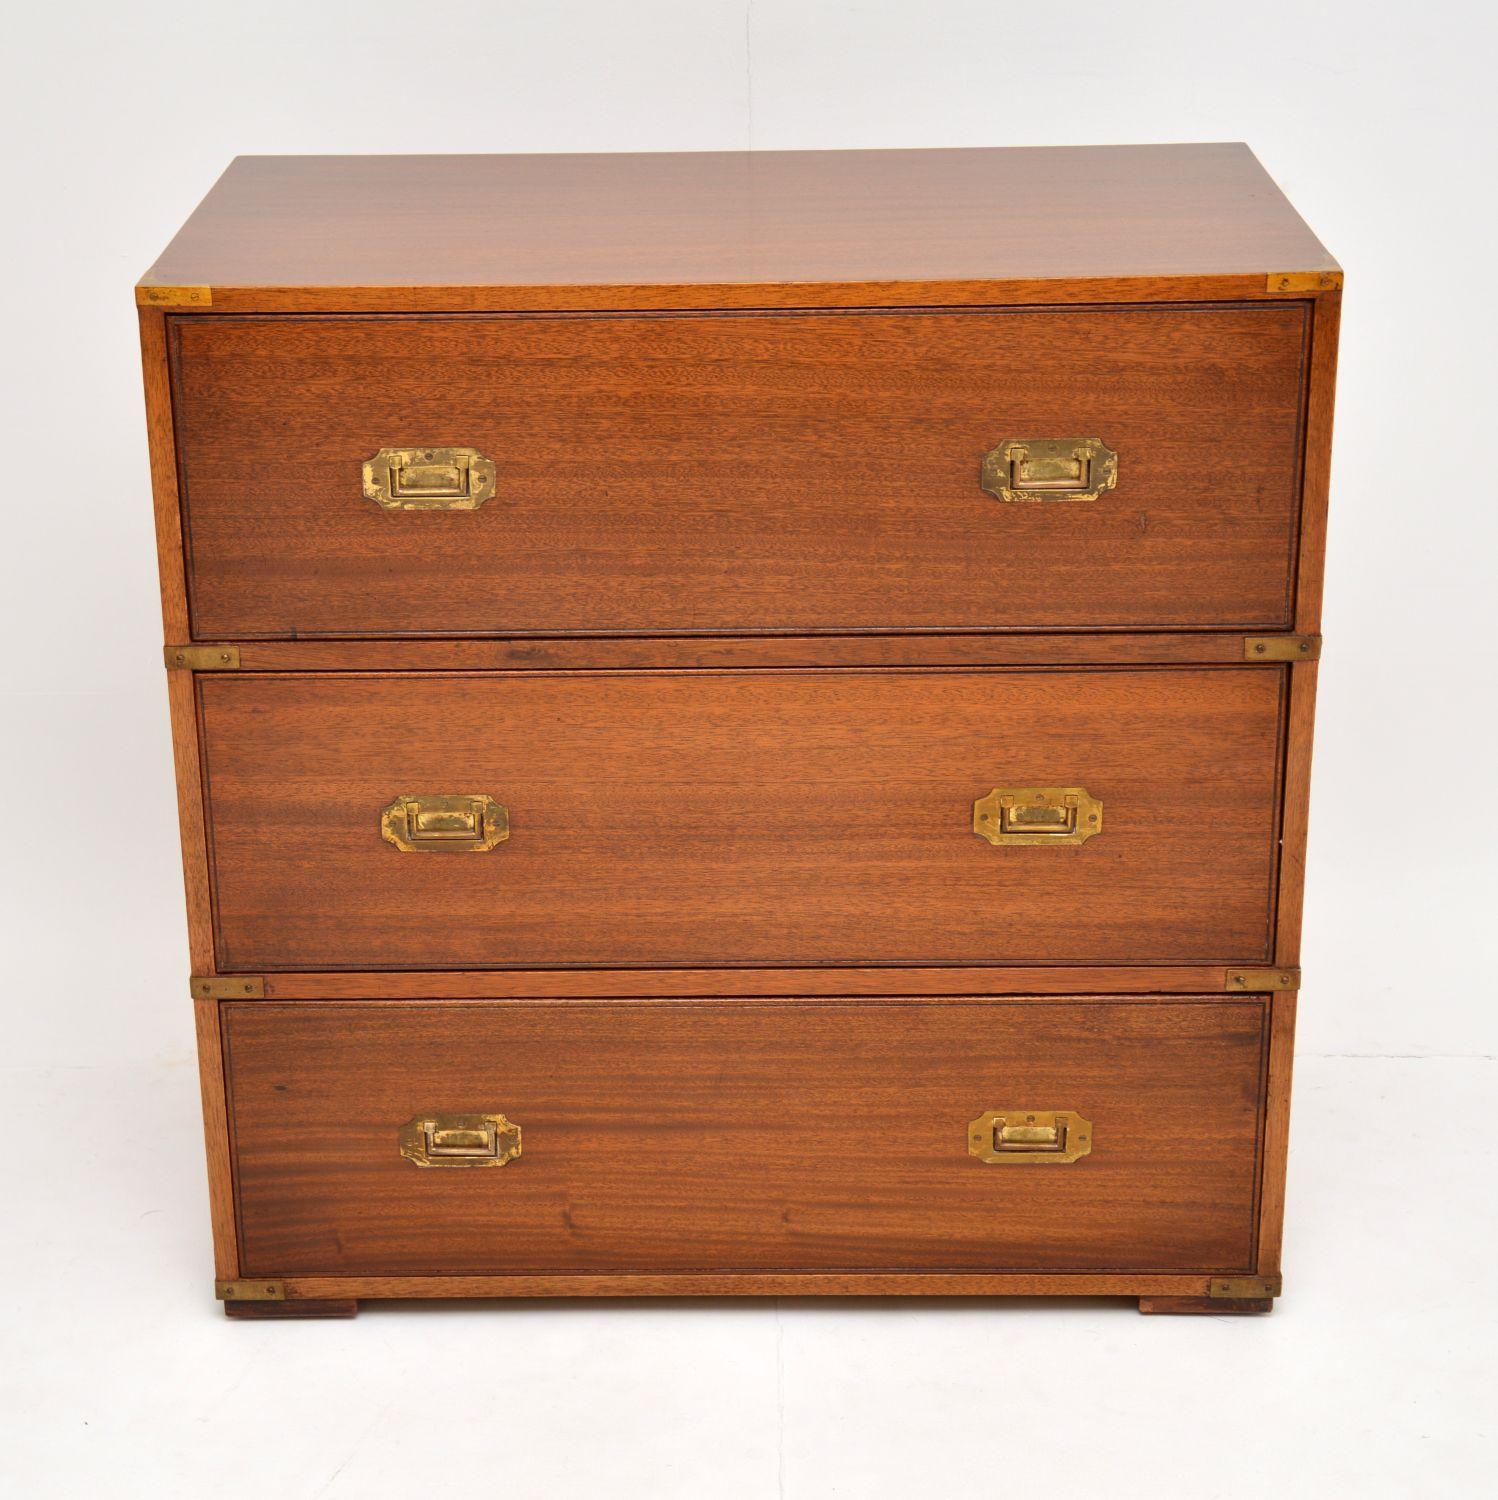 A handsome and useful antique military campaign style chest of drawers, this dates from around the 1930s-1950s.

This chest is a nice compact piece of furniture with deep drawers & plenty of storage. It’s mahogany with brass corner fittings, brass